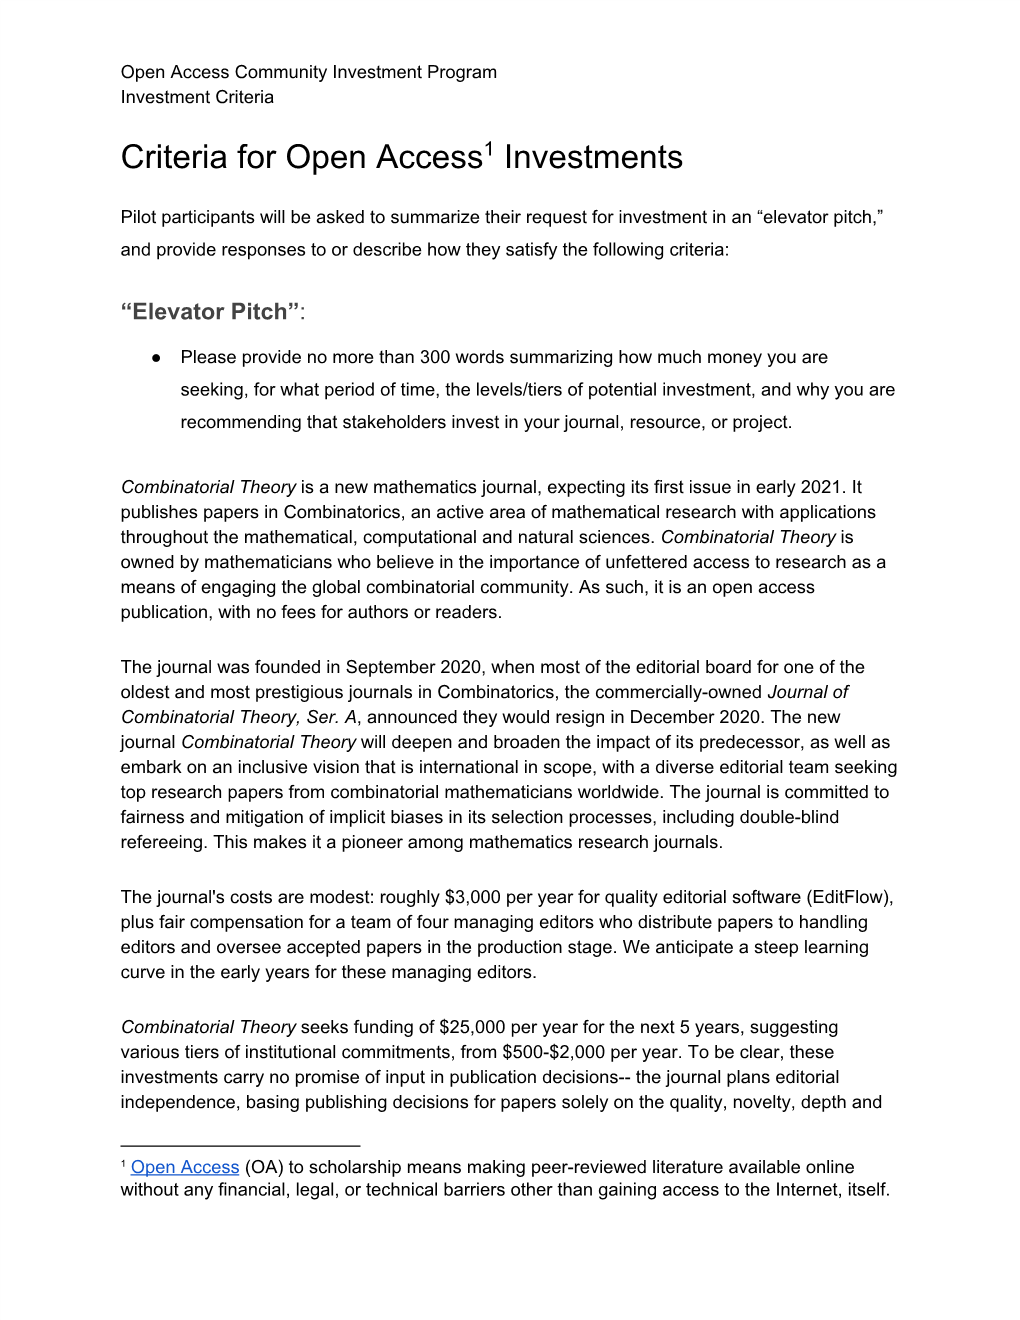 Criteria for Open Access Investments